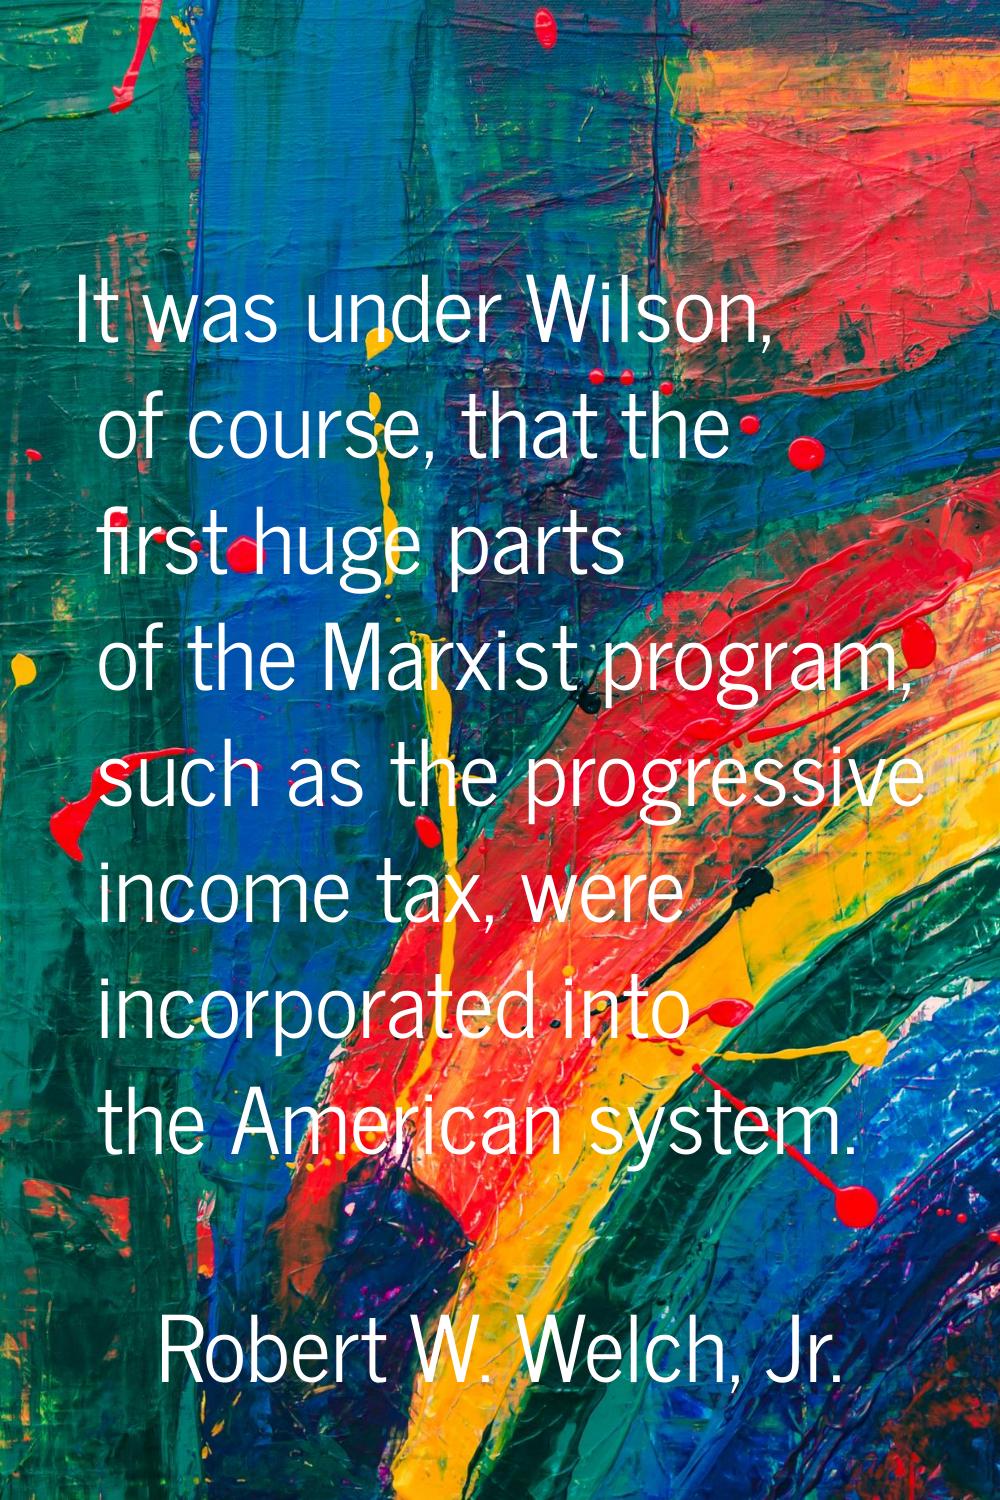 It was under Wilson, of course, that the first huge parts of the Marxist program, such as the progr